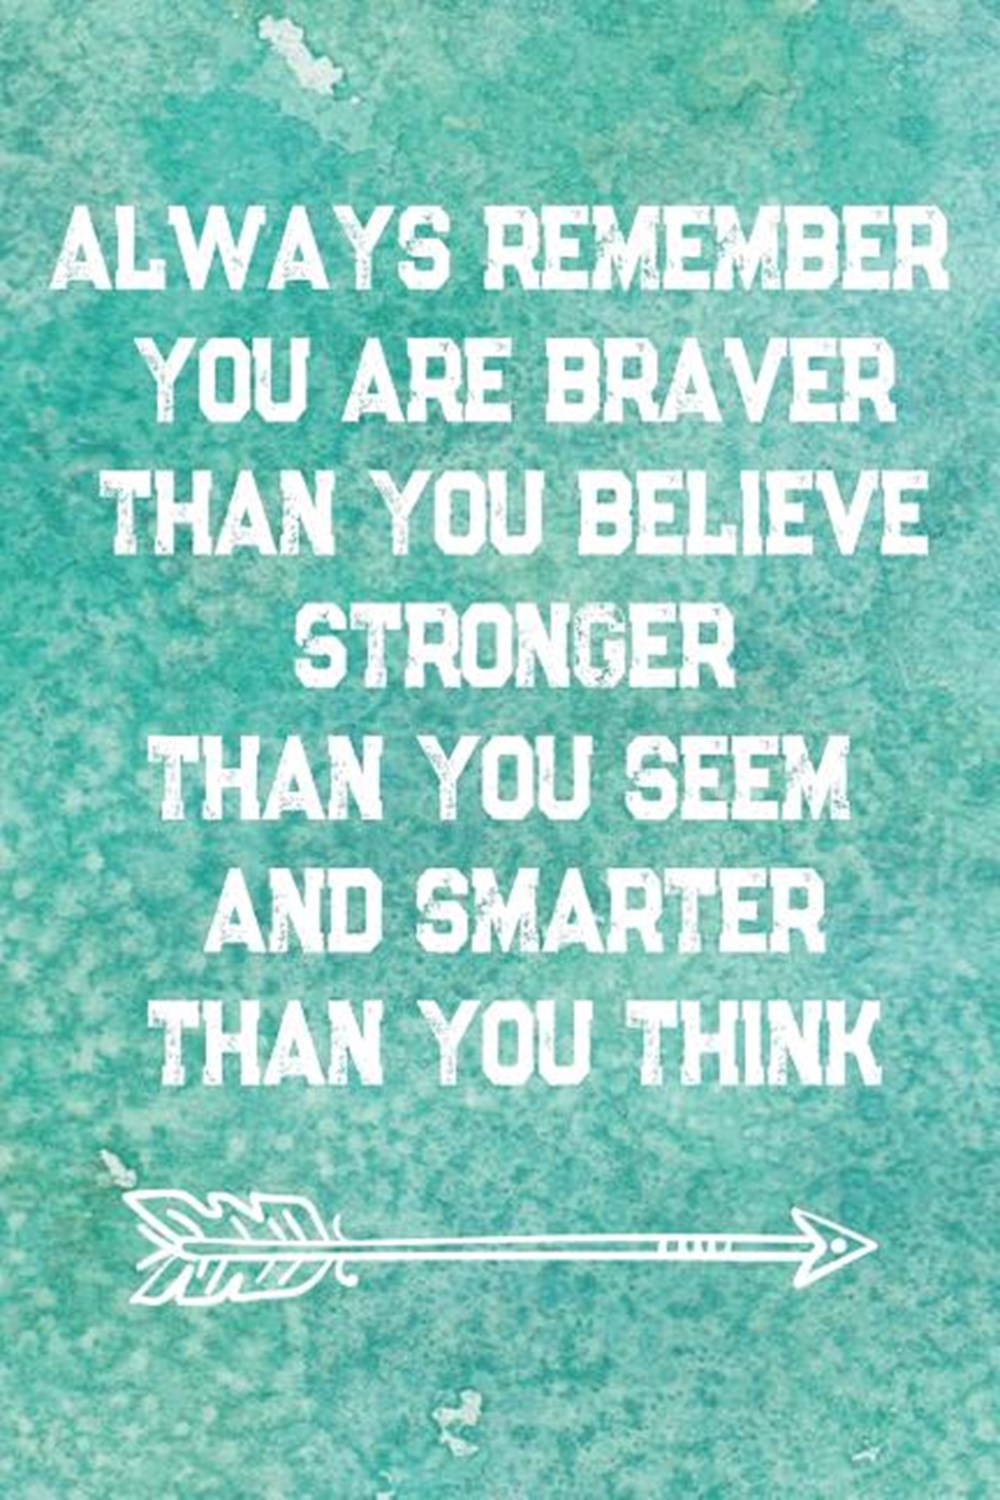 Always Remember You Are Braver Than You Believe Stronger Than You Seem And Smarter Than You Think: C